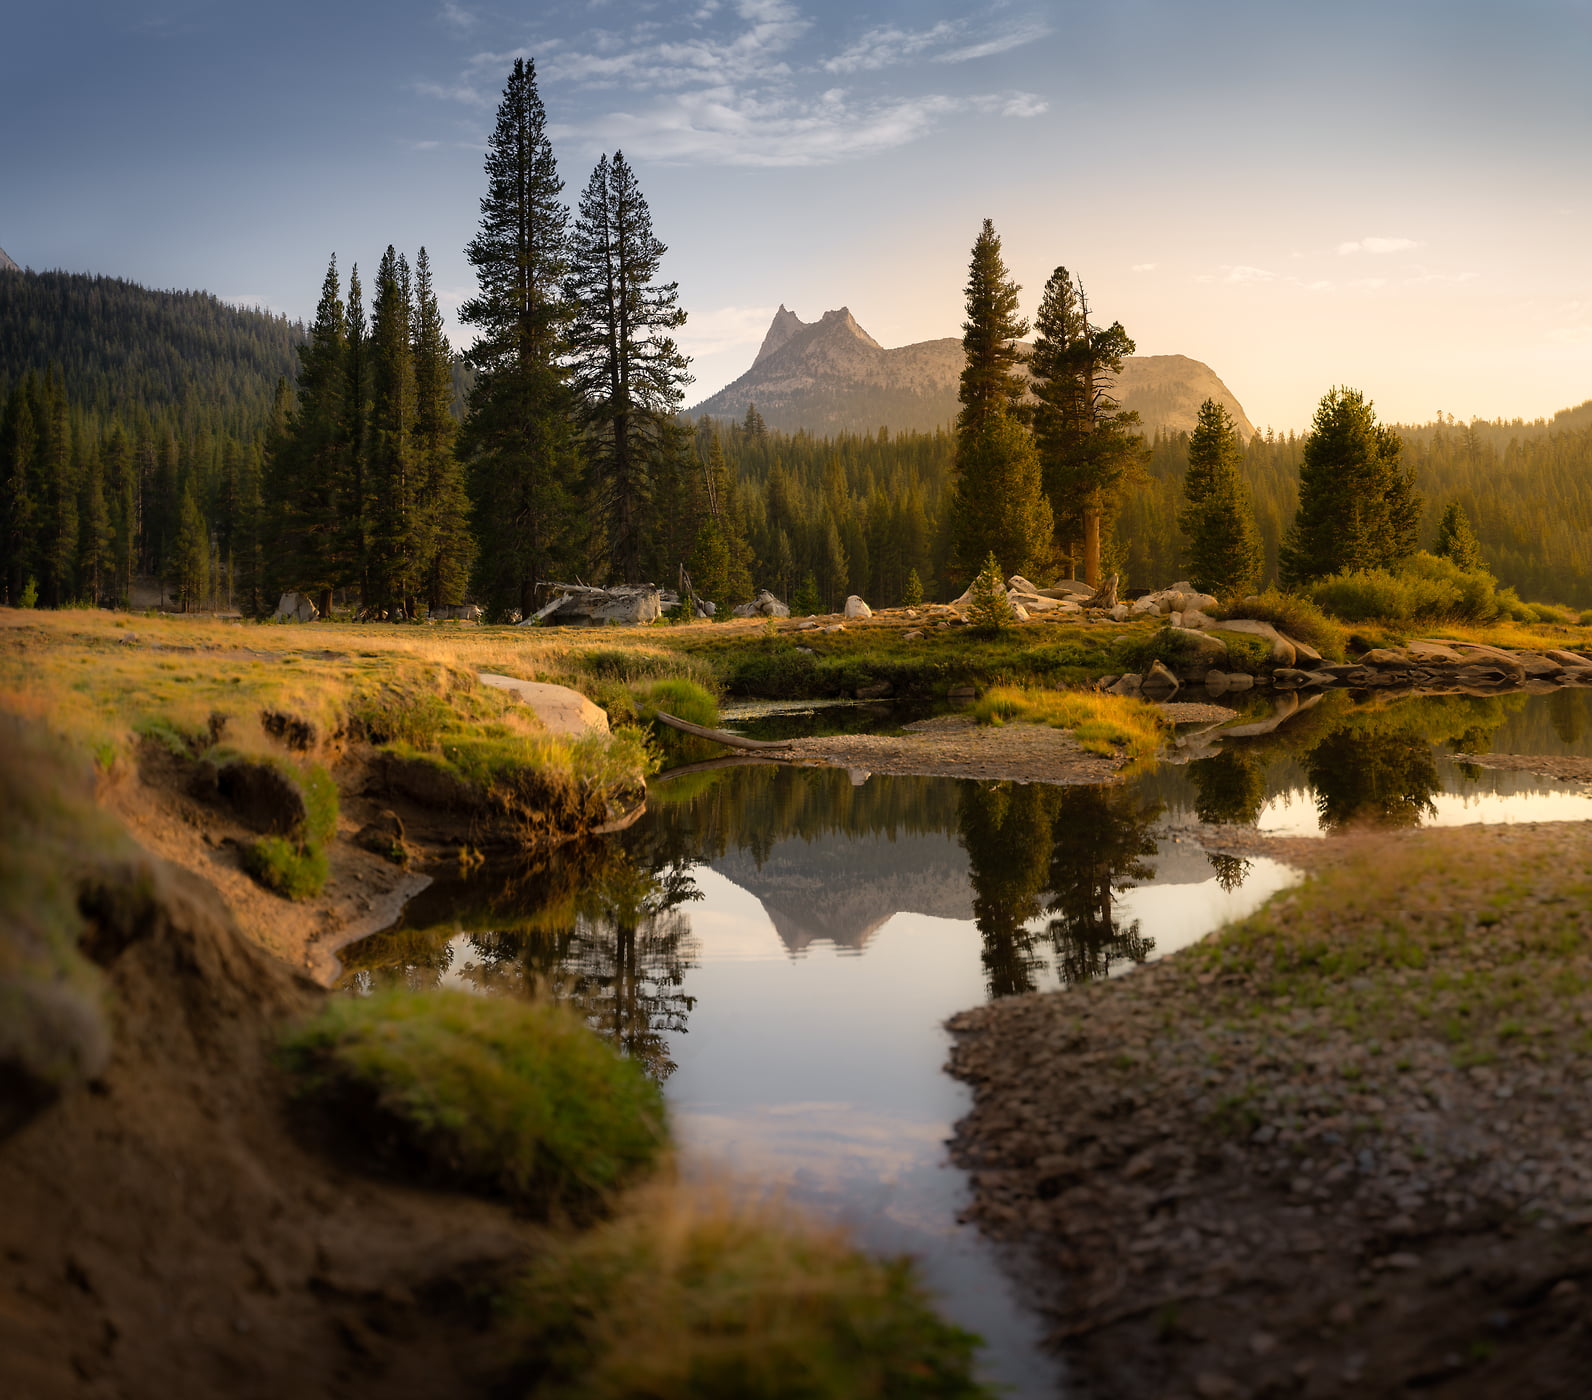 285 megapixels! A very high resolution, large-format VAST photo print of a nature scene with a stream and a forest and mountain in the background; peaceful nature landscape photograph created by Jeff Lewis in Tuolumne Meadows, Yosemite National Park, California